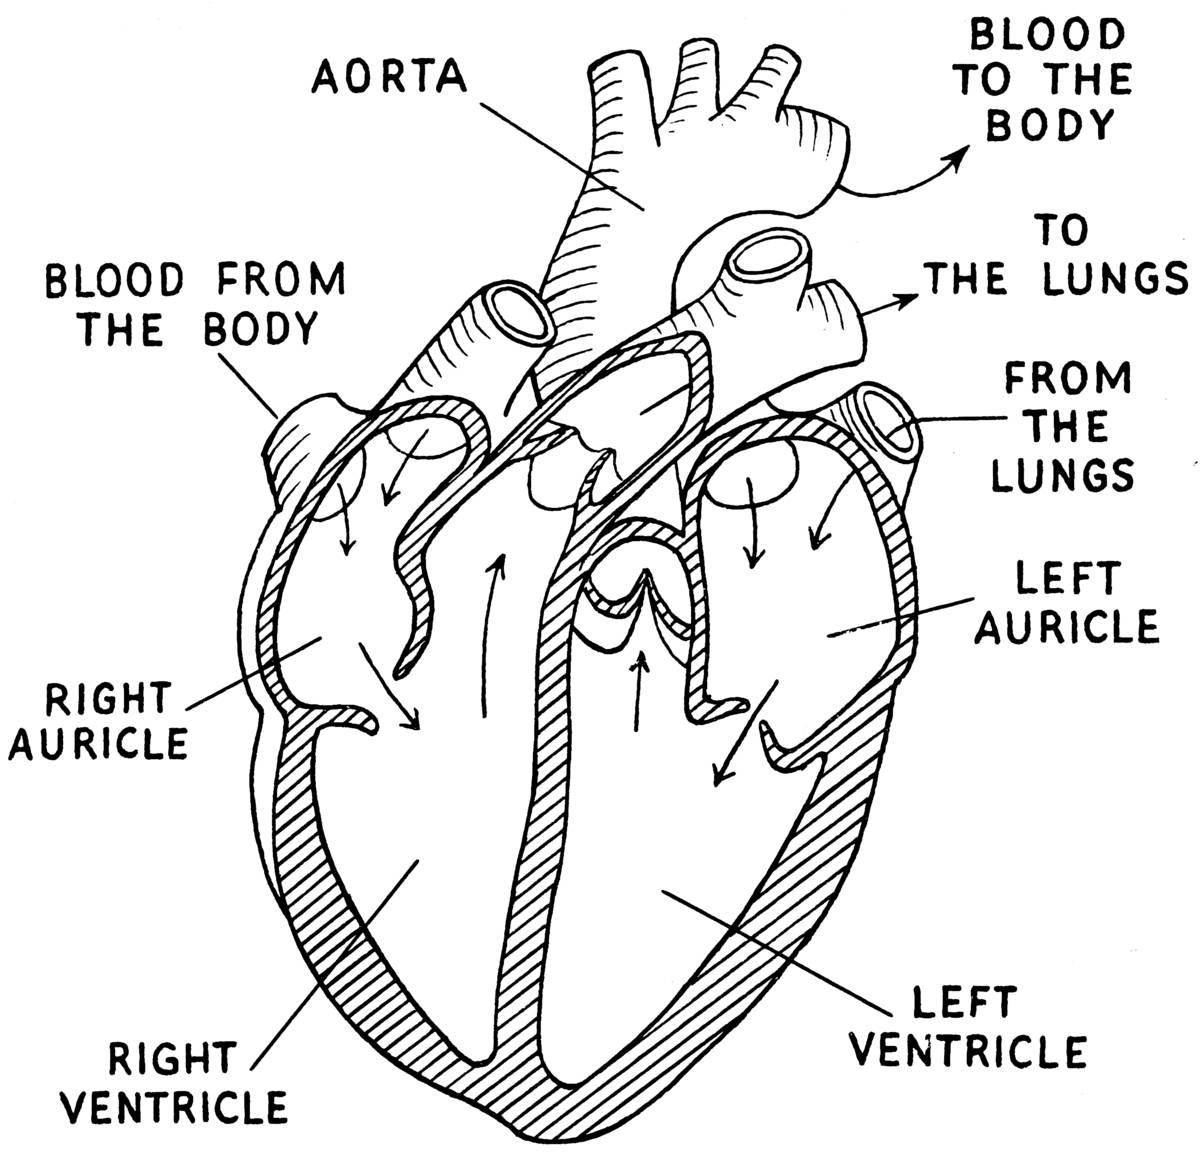 Playful coloring of the heart organ